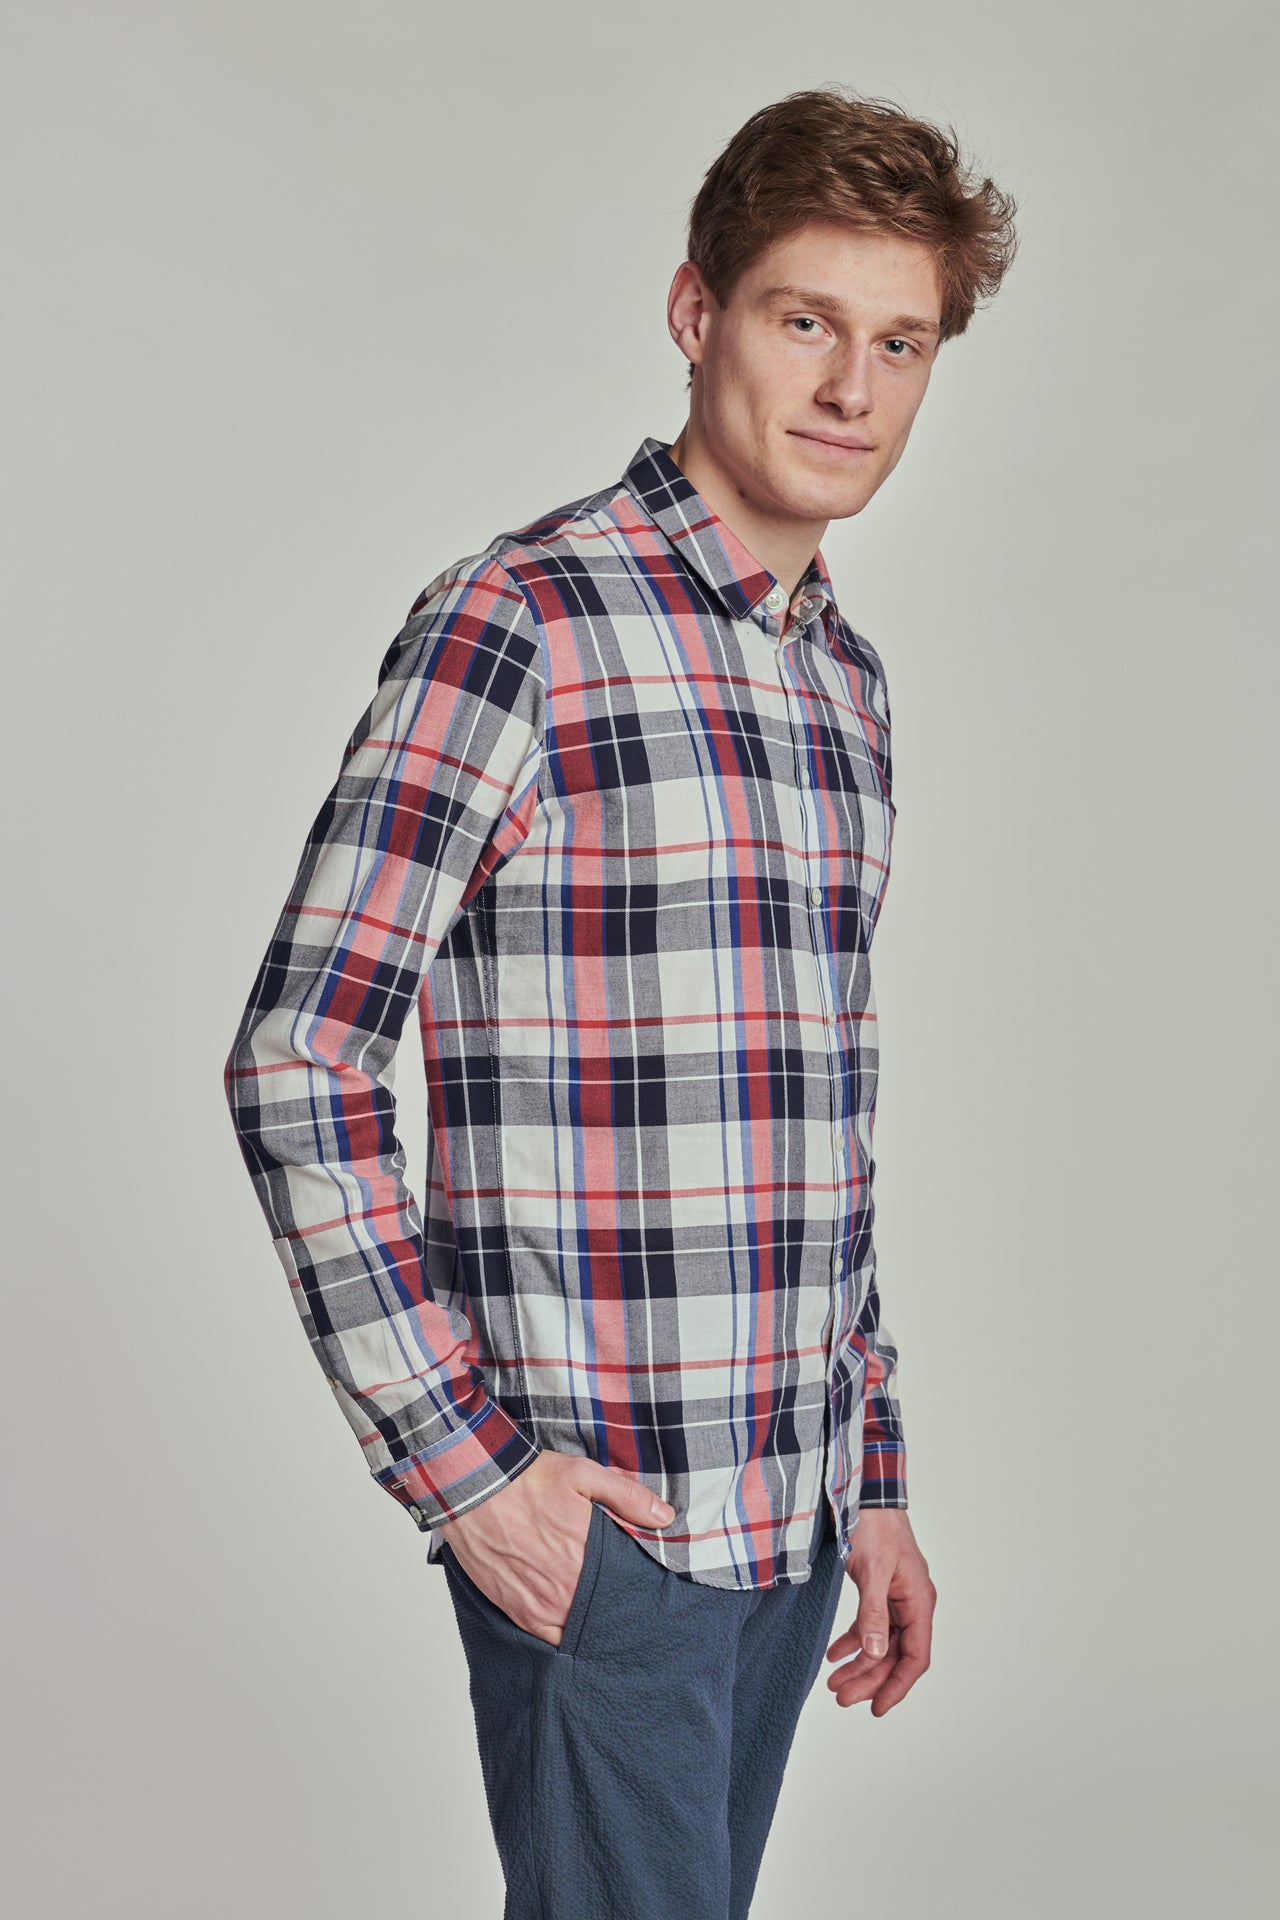 Proper Shirt in a Red, Black, Dark Blue and White chequered Japanese Cotton Flannel